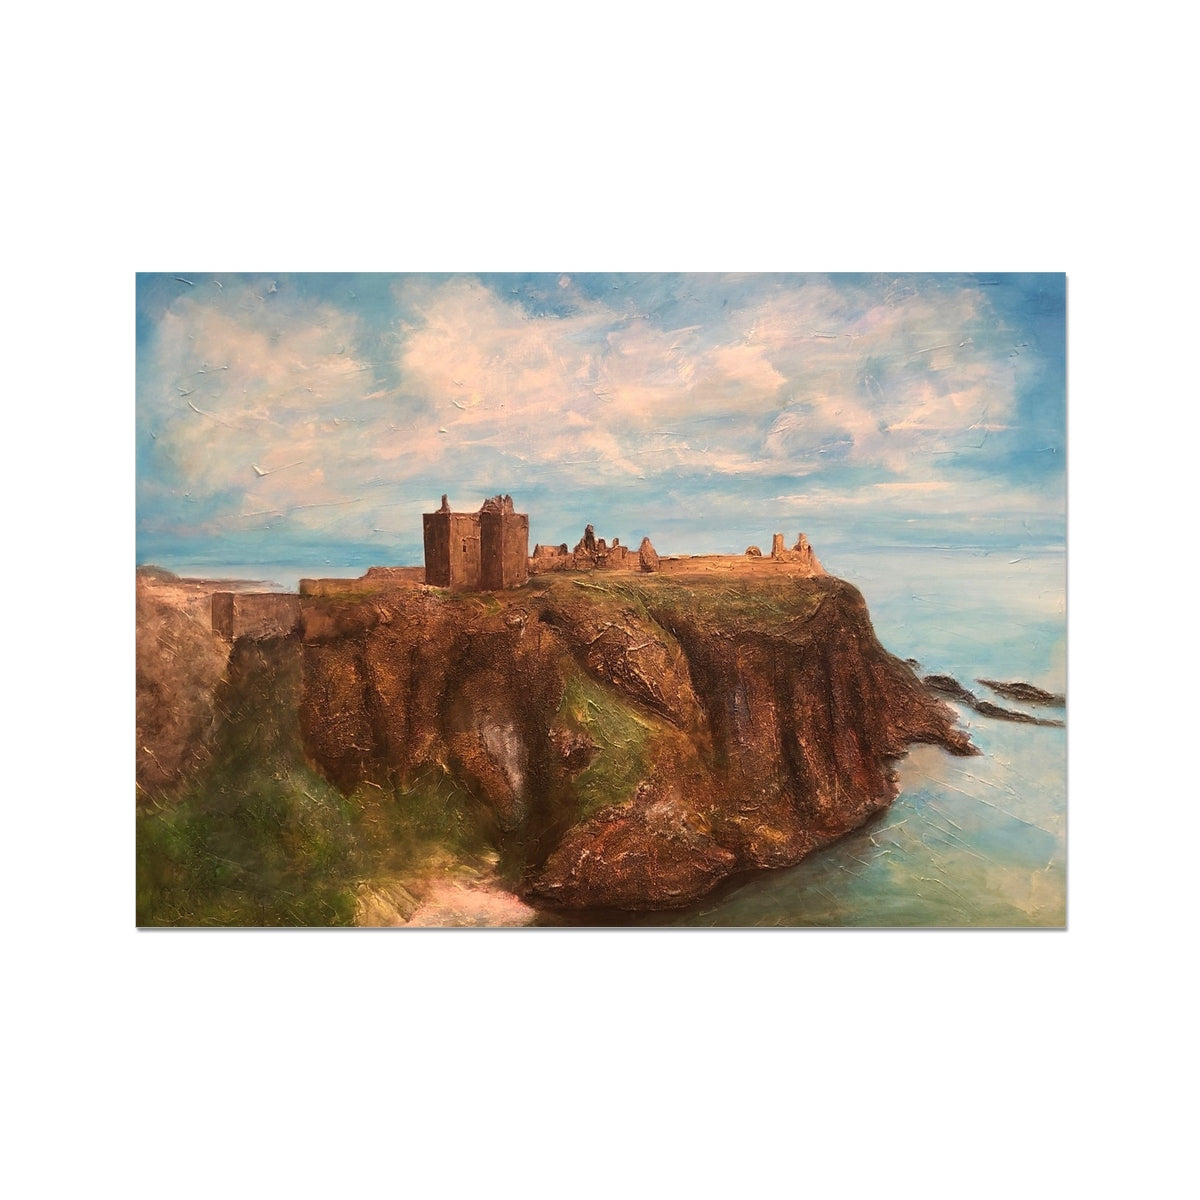 Dunnottar Castle Painting | Fine Art Prints From Scotland-Unframed Prints-Historic & Iconic Scotland Art Gallery-A2 Landscape-Paintings, Prints, Homeware, Art Gifts From Scotland By Scottish Artist Kevin Hunter